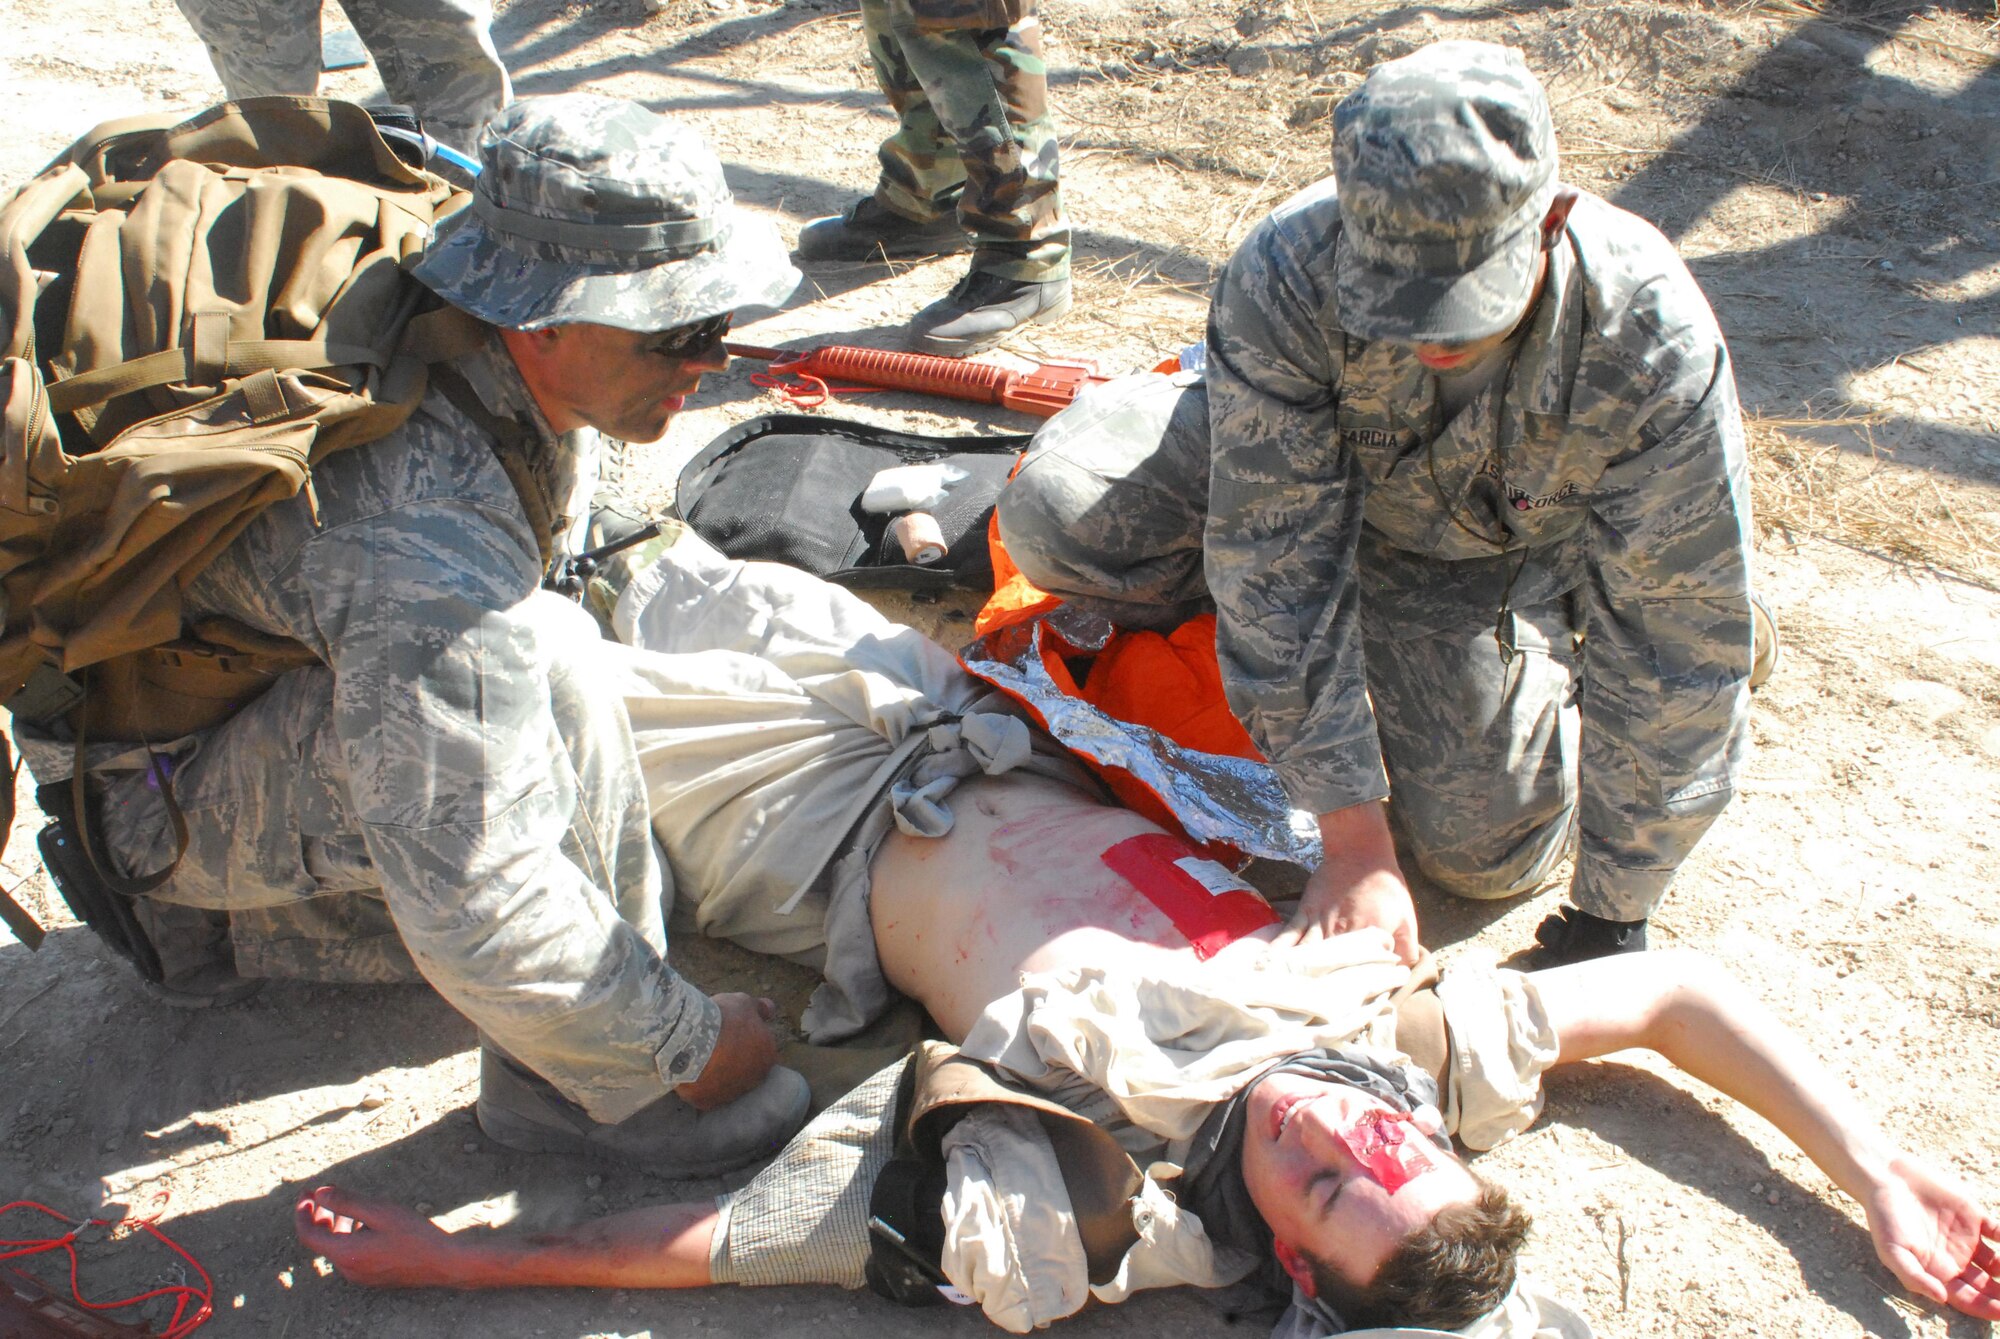 Airmen from the 460th Medical Group care for a patient during a training exercise Oct. 3, 2015, at Fort Carson, Colo. The 460th MDG completed annual combat leadership and combat medic training in order to prepare themselves for situations they could find themselves in while deployed in a hostile environment. (Courtesy photo)